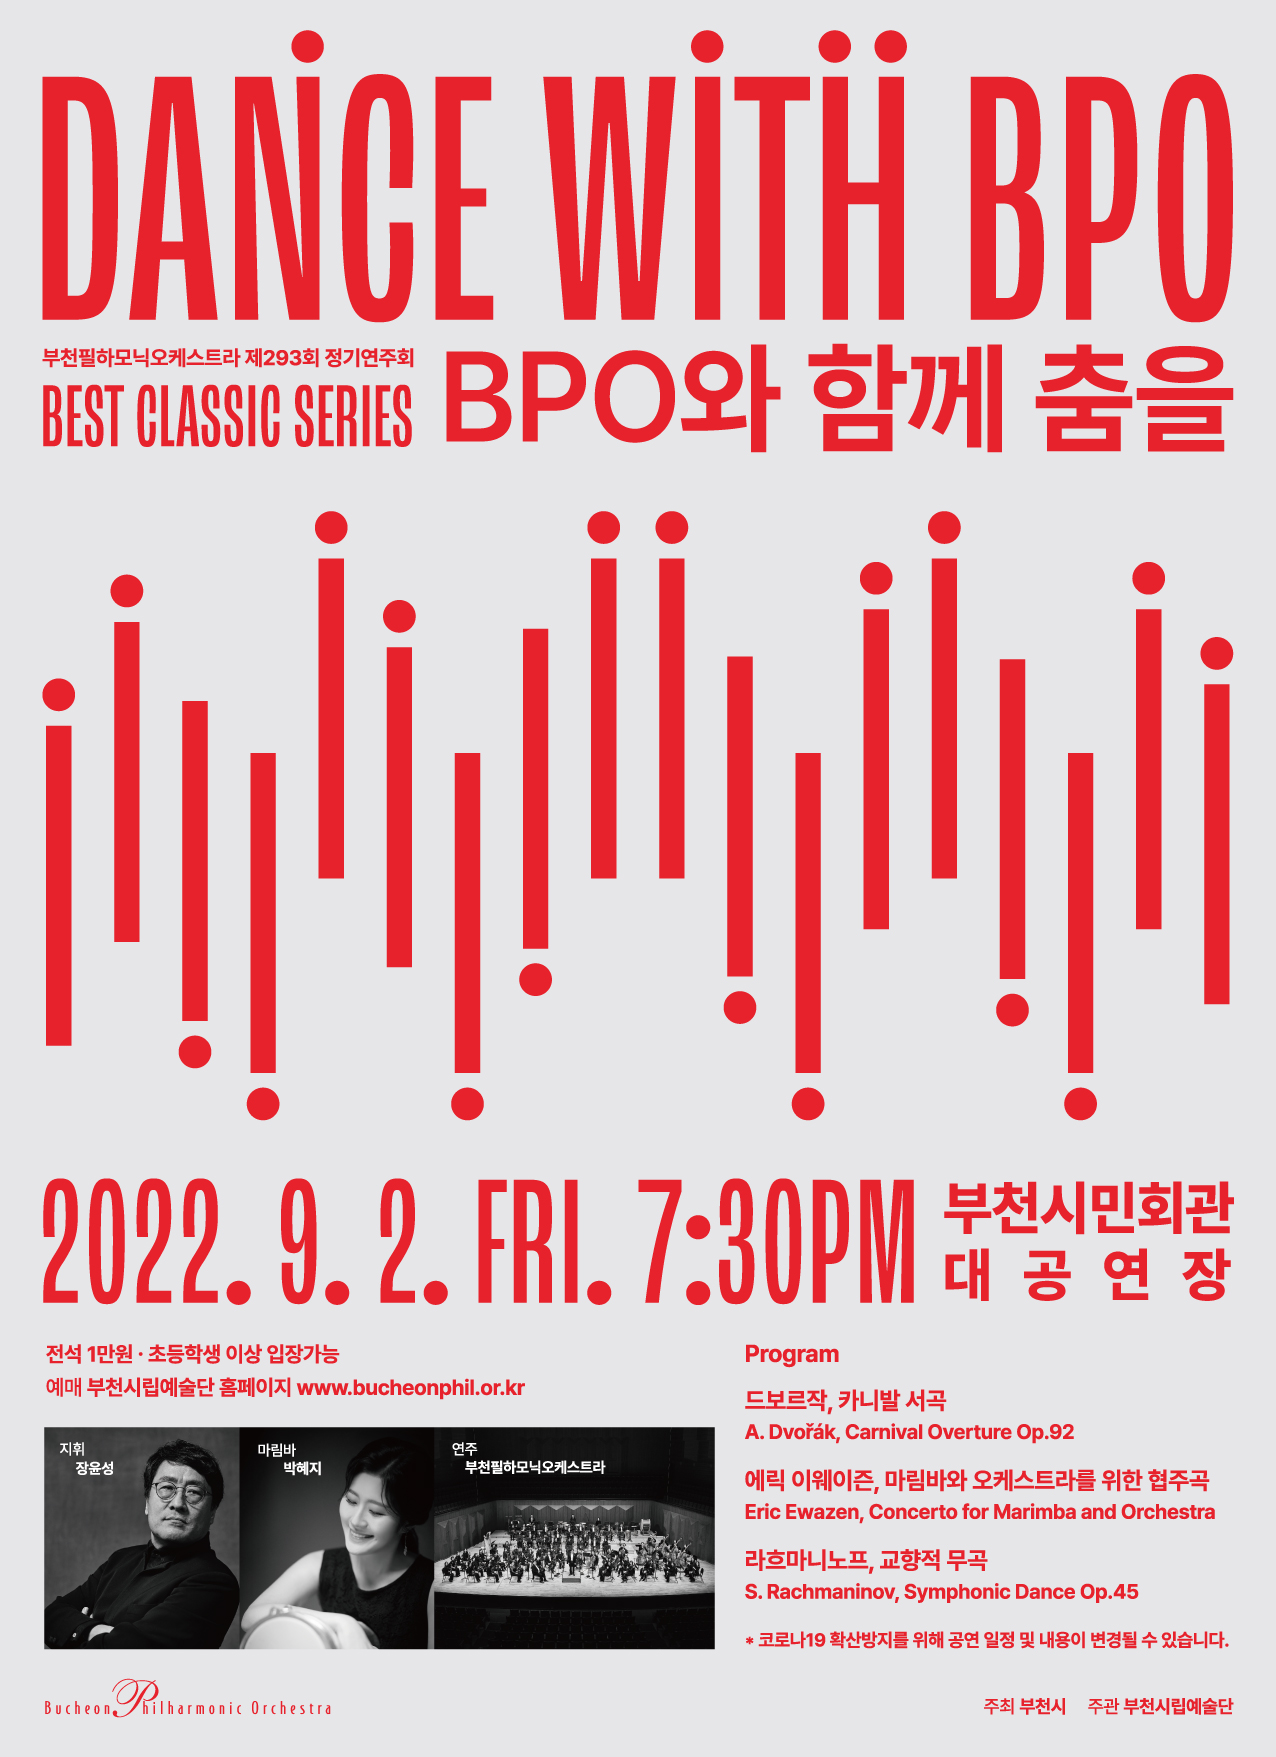 Bucheon Philharmonic Orchestra 293rd Subscription Concert - Best Classic Series 'Dance with BPO'